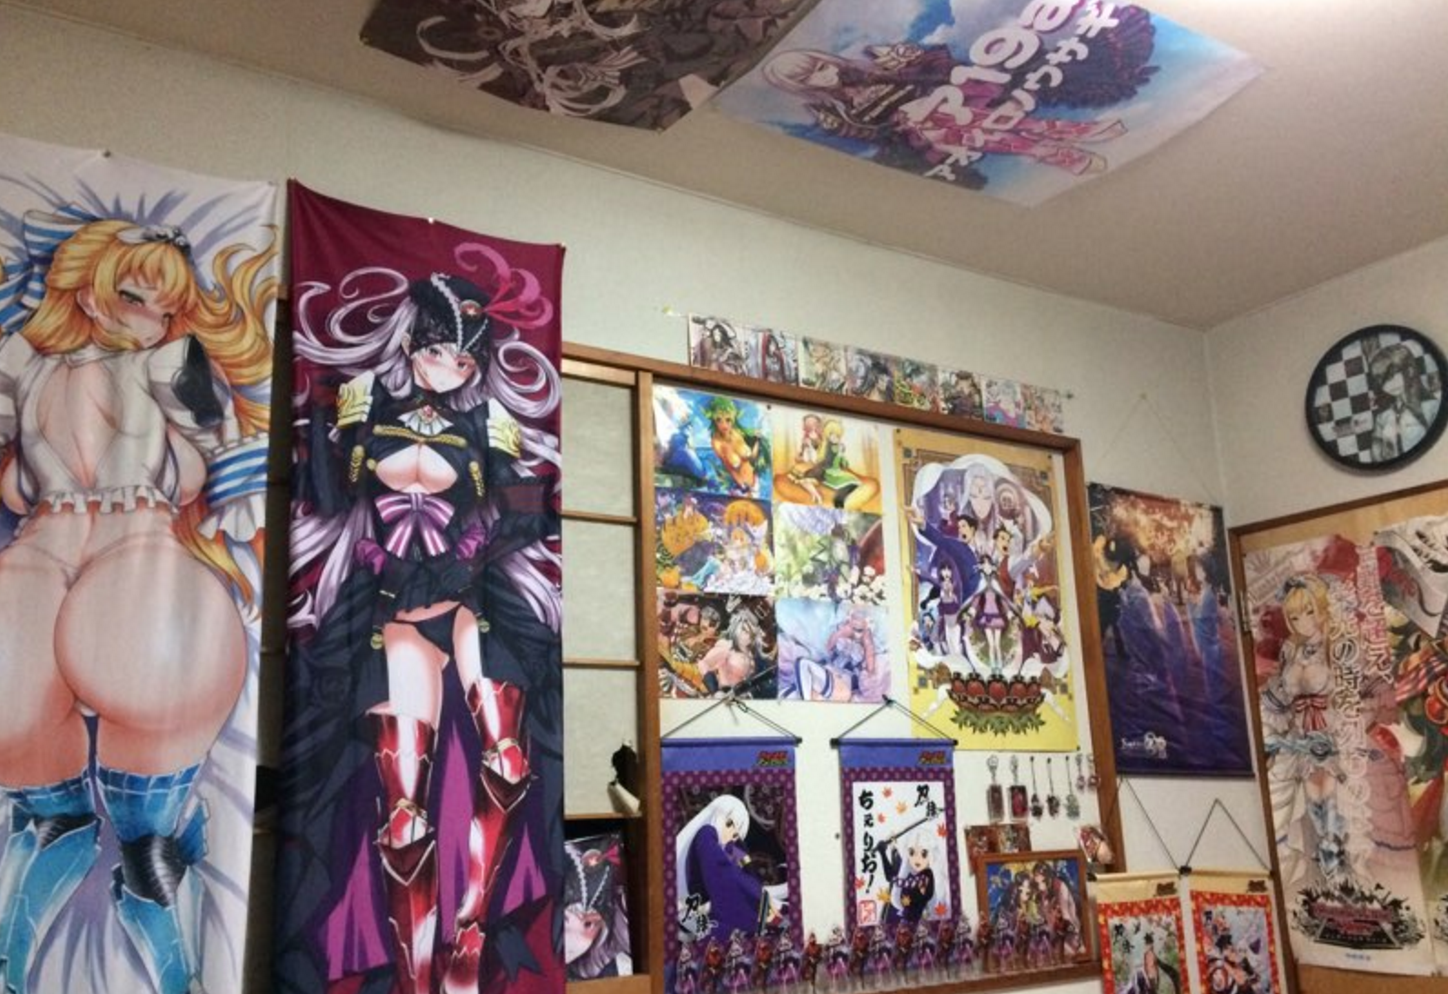 Let's take a look at the rooms of Japanese otaku